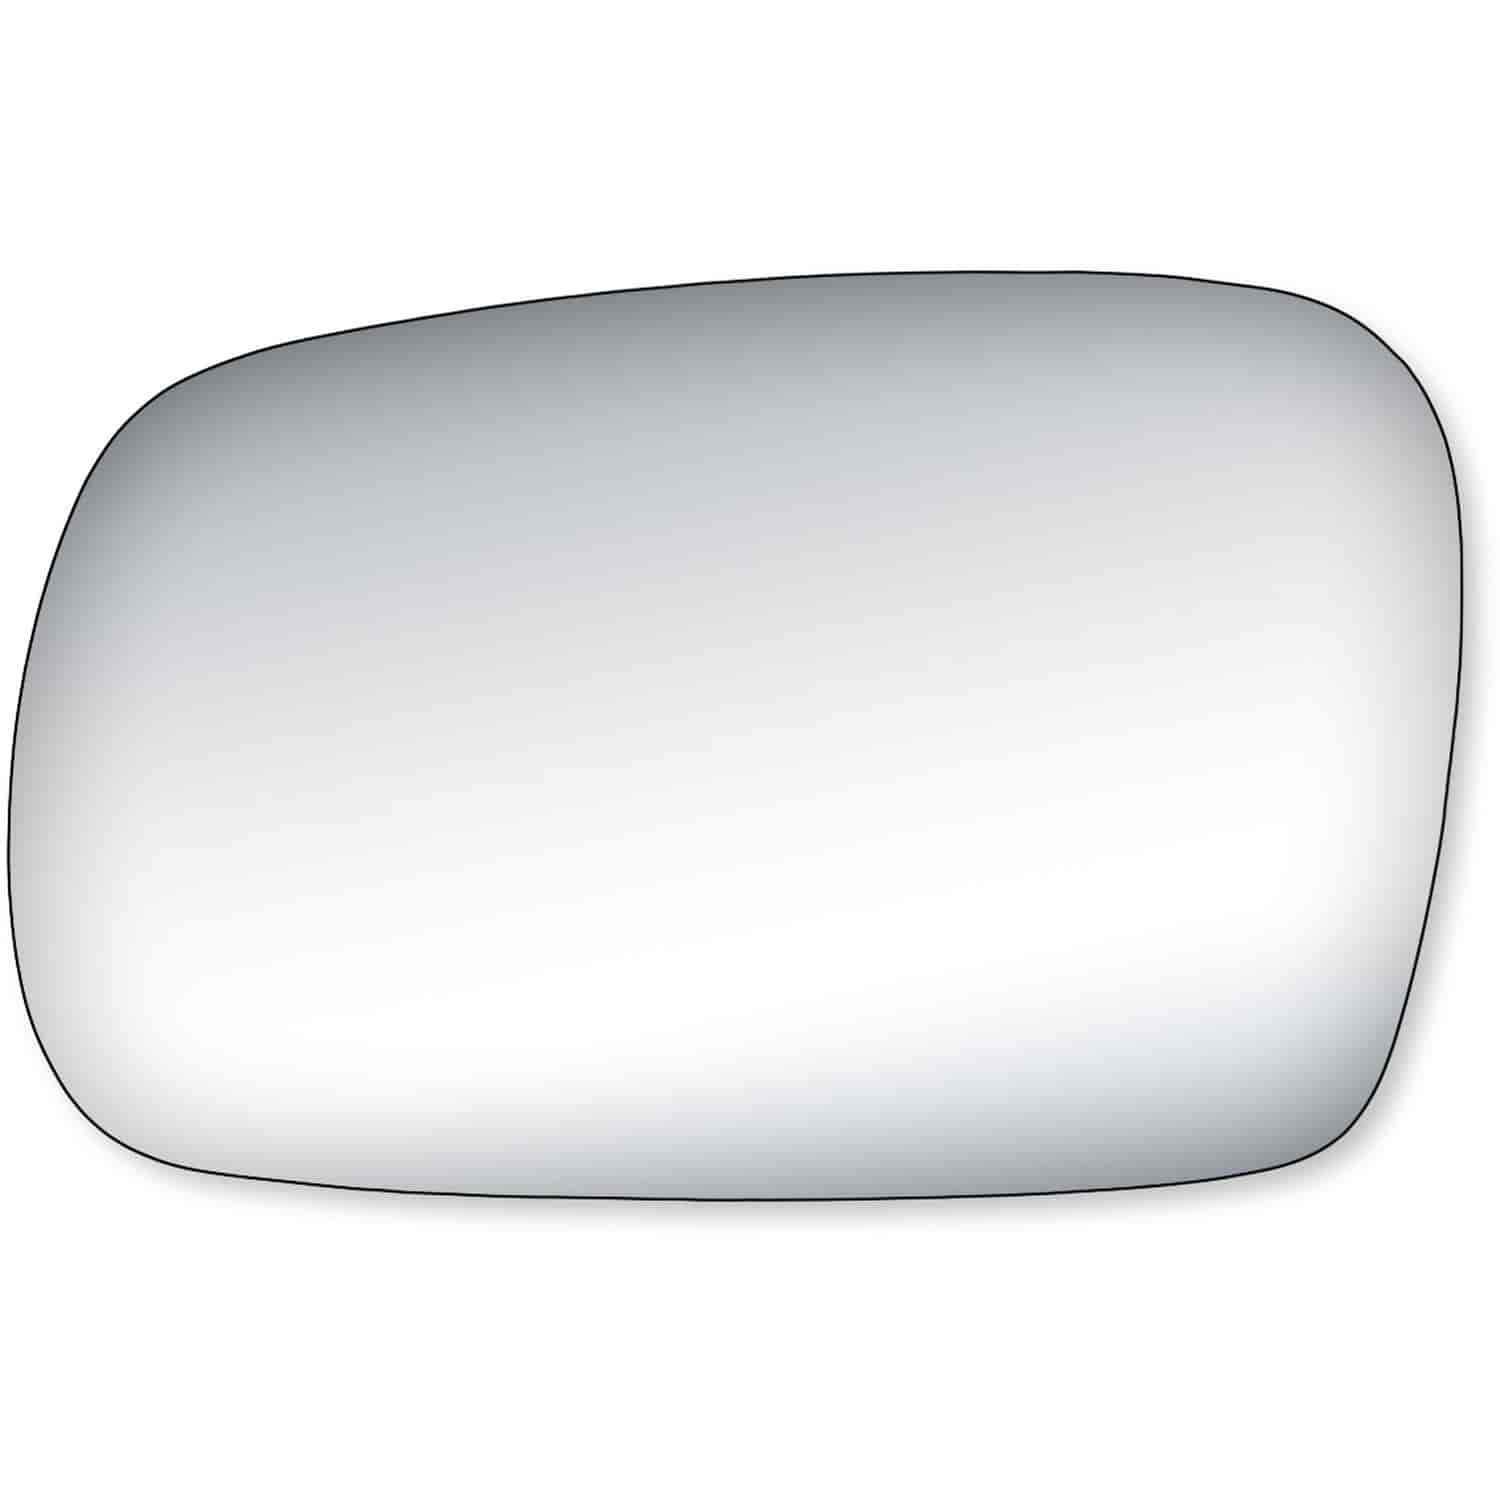 Replacement Glass for 06-11 Civic Coupe the glass measures 4 7/16 tall by 6 15/16 wide and 7 3/8 dia